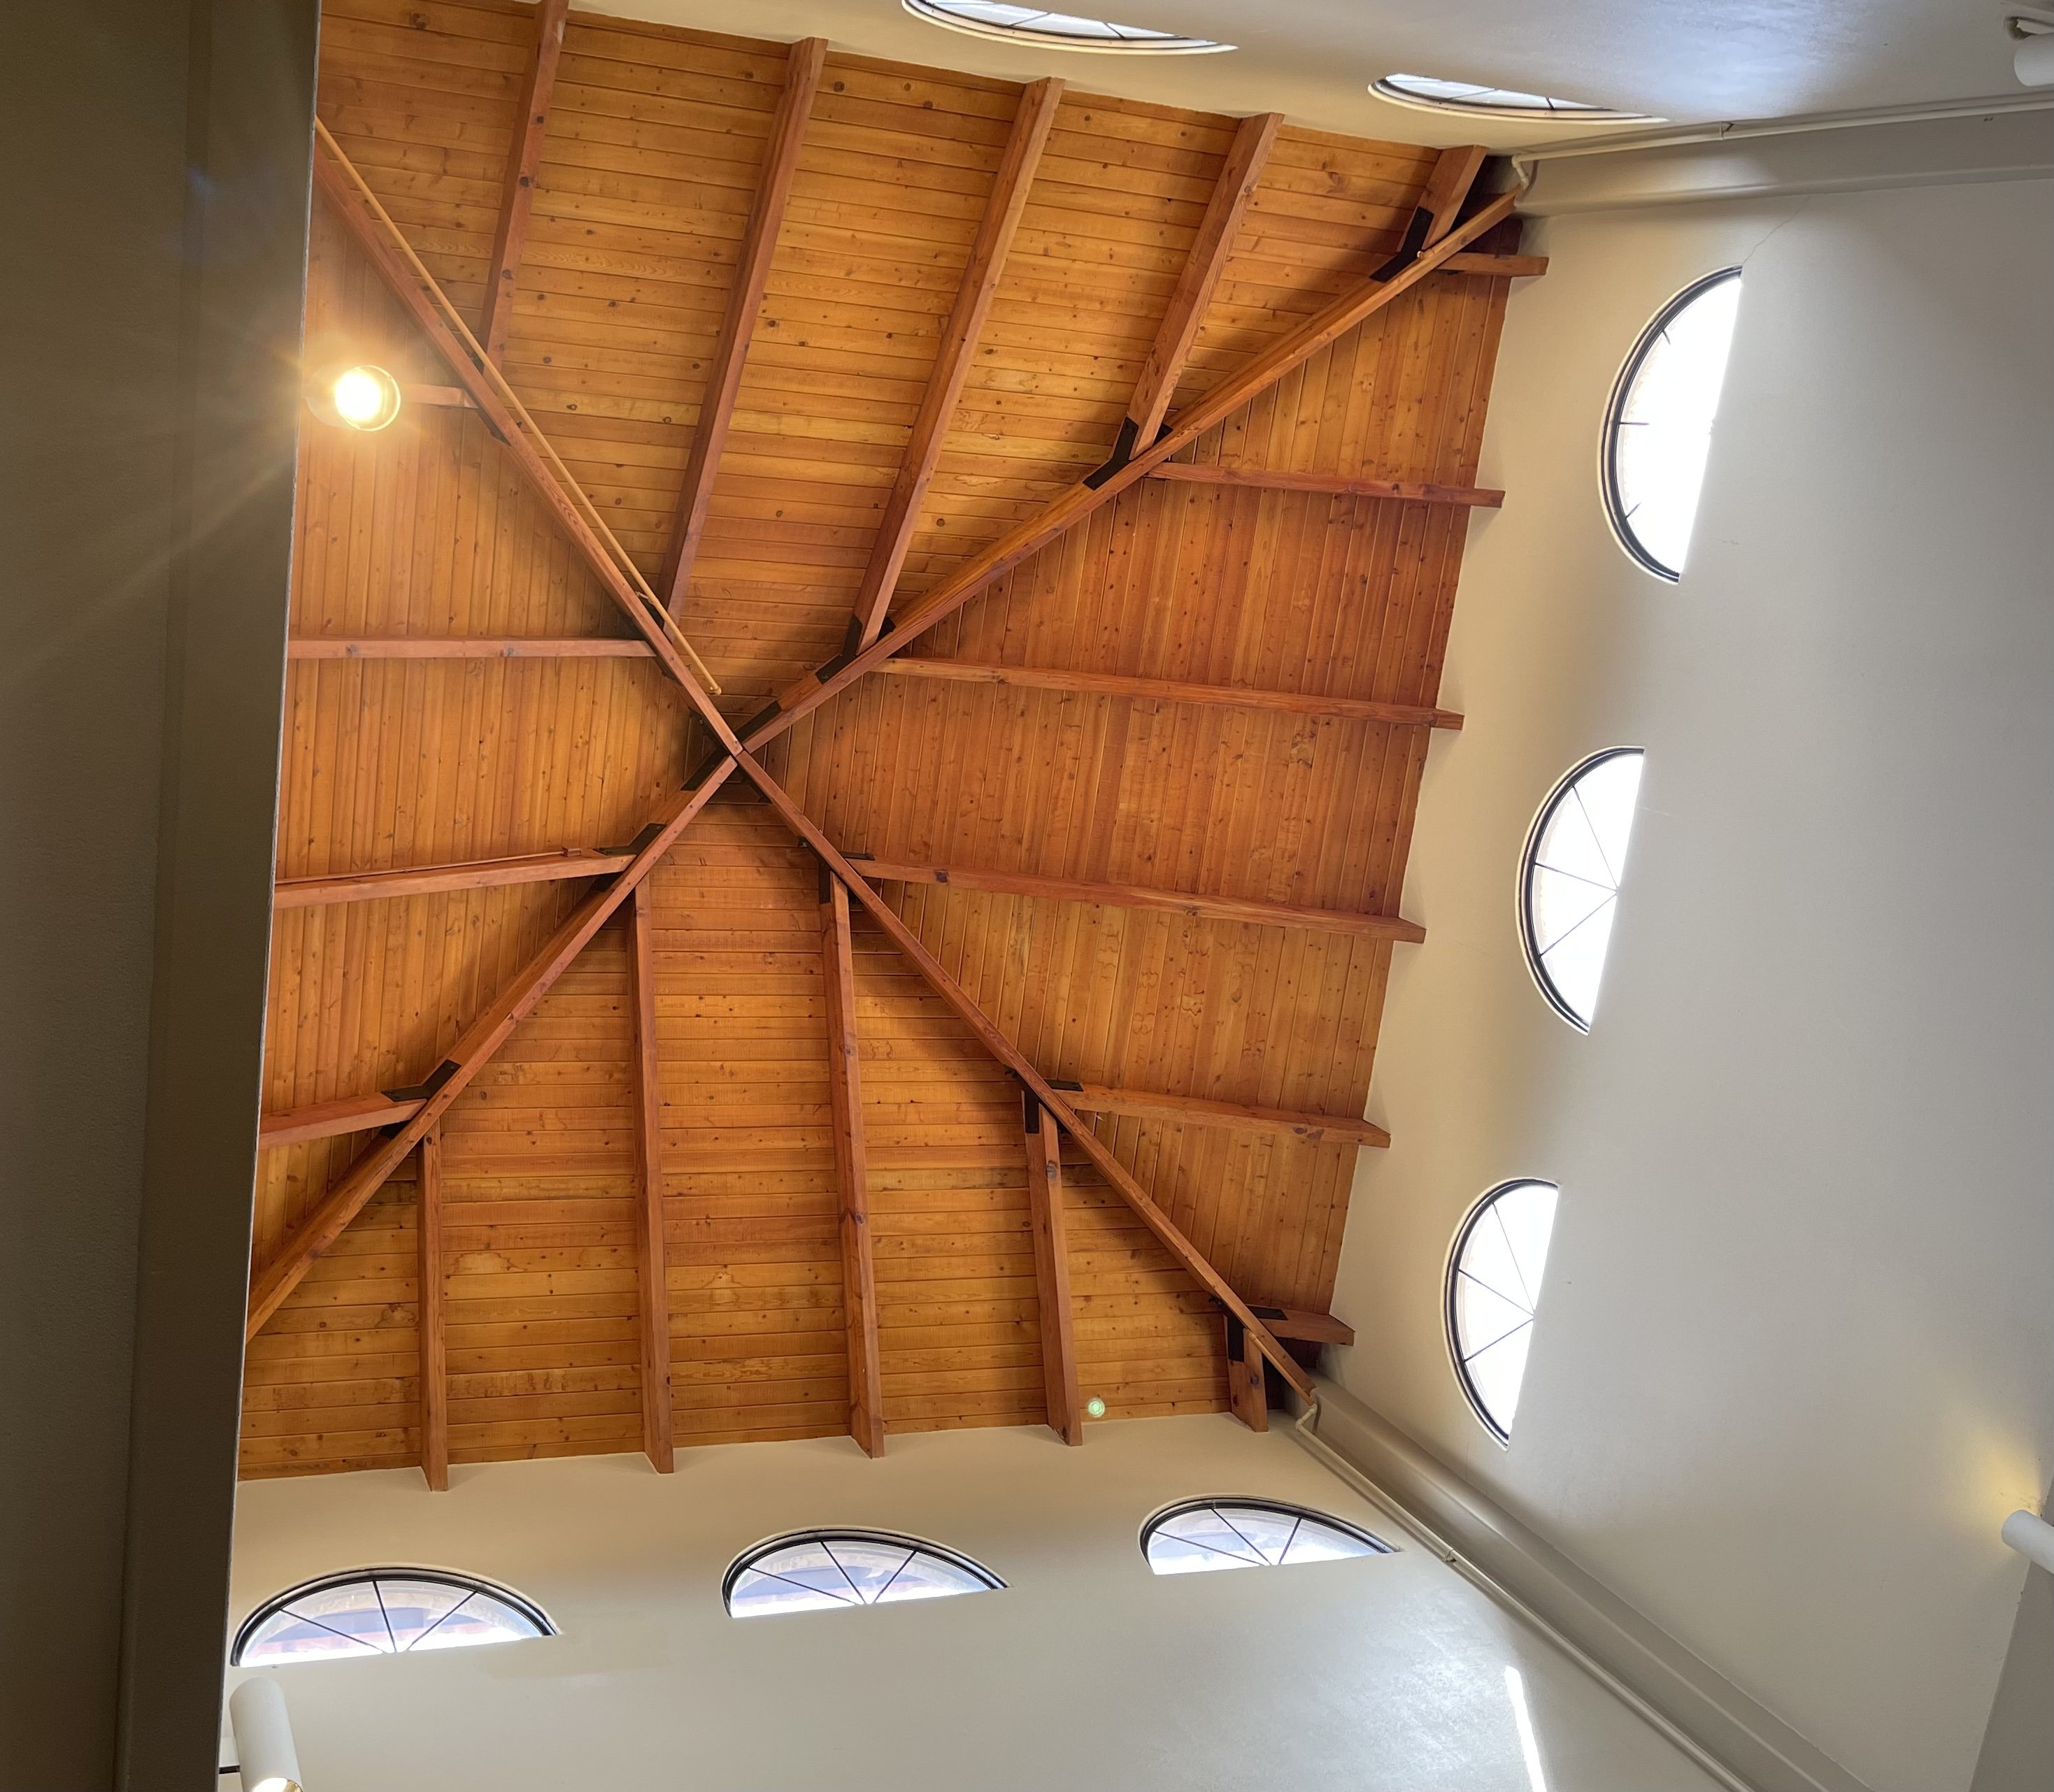 Interior view from below of a high peaked roof constructed of wood framing and planks. 